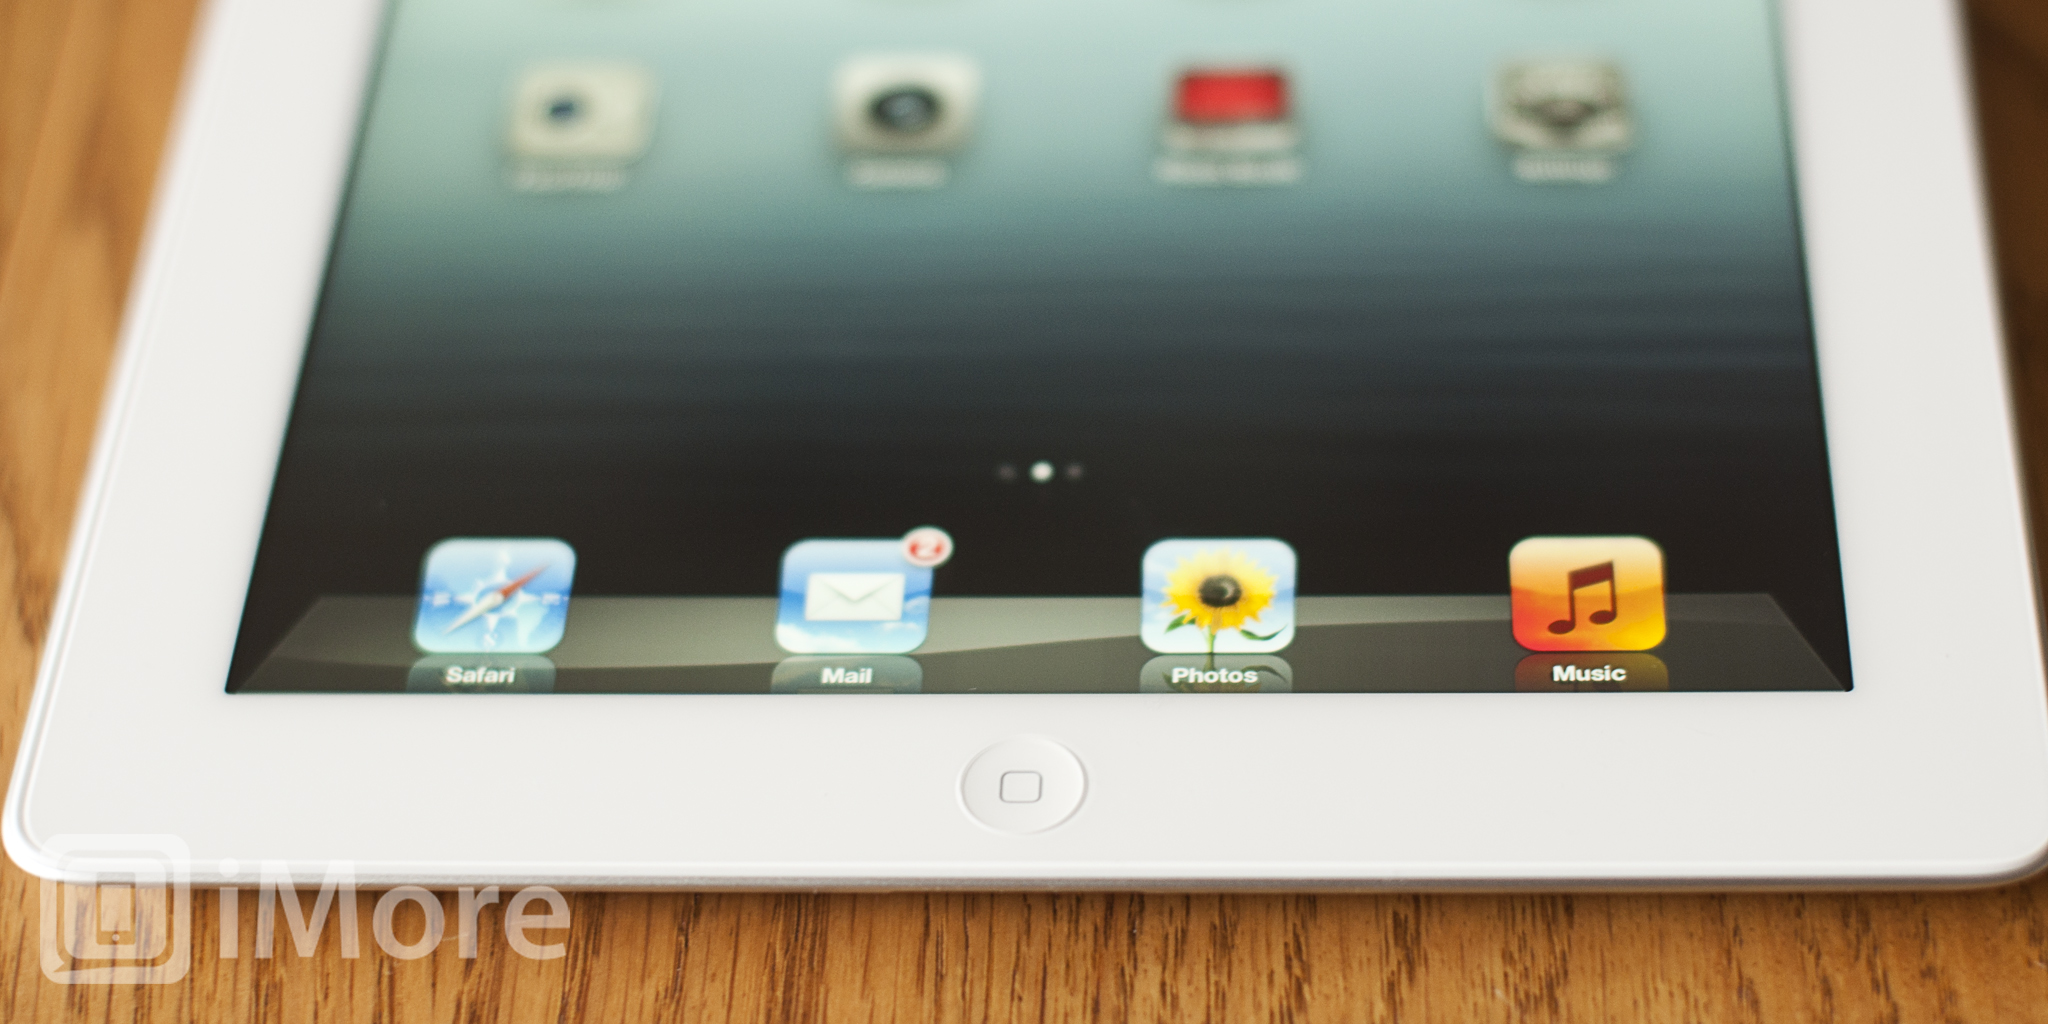 How to use the iPad Home button to navigate, access the fast app